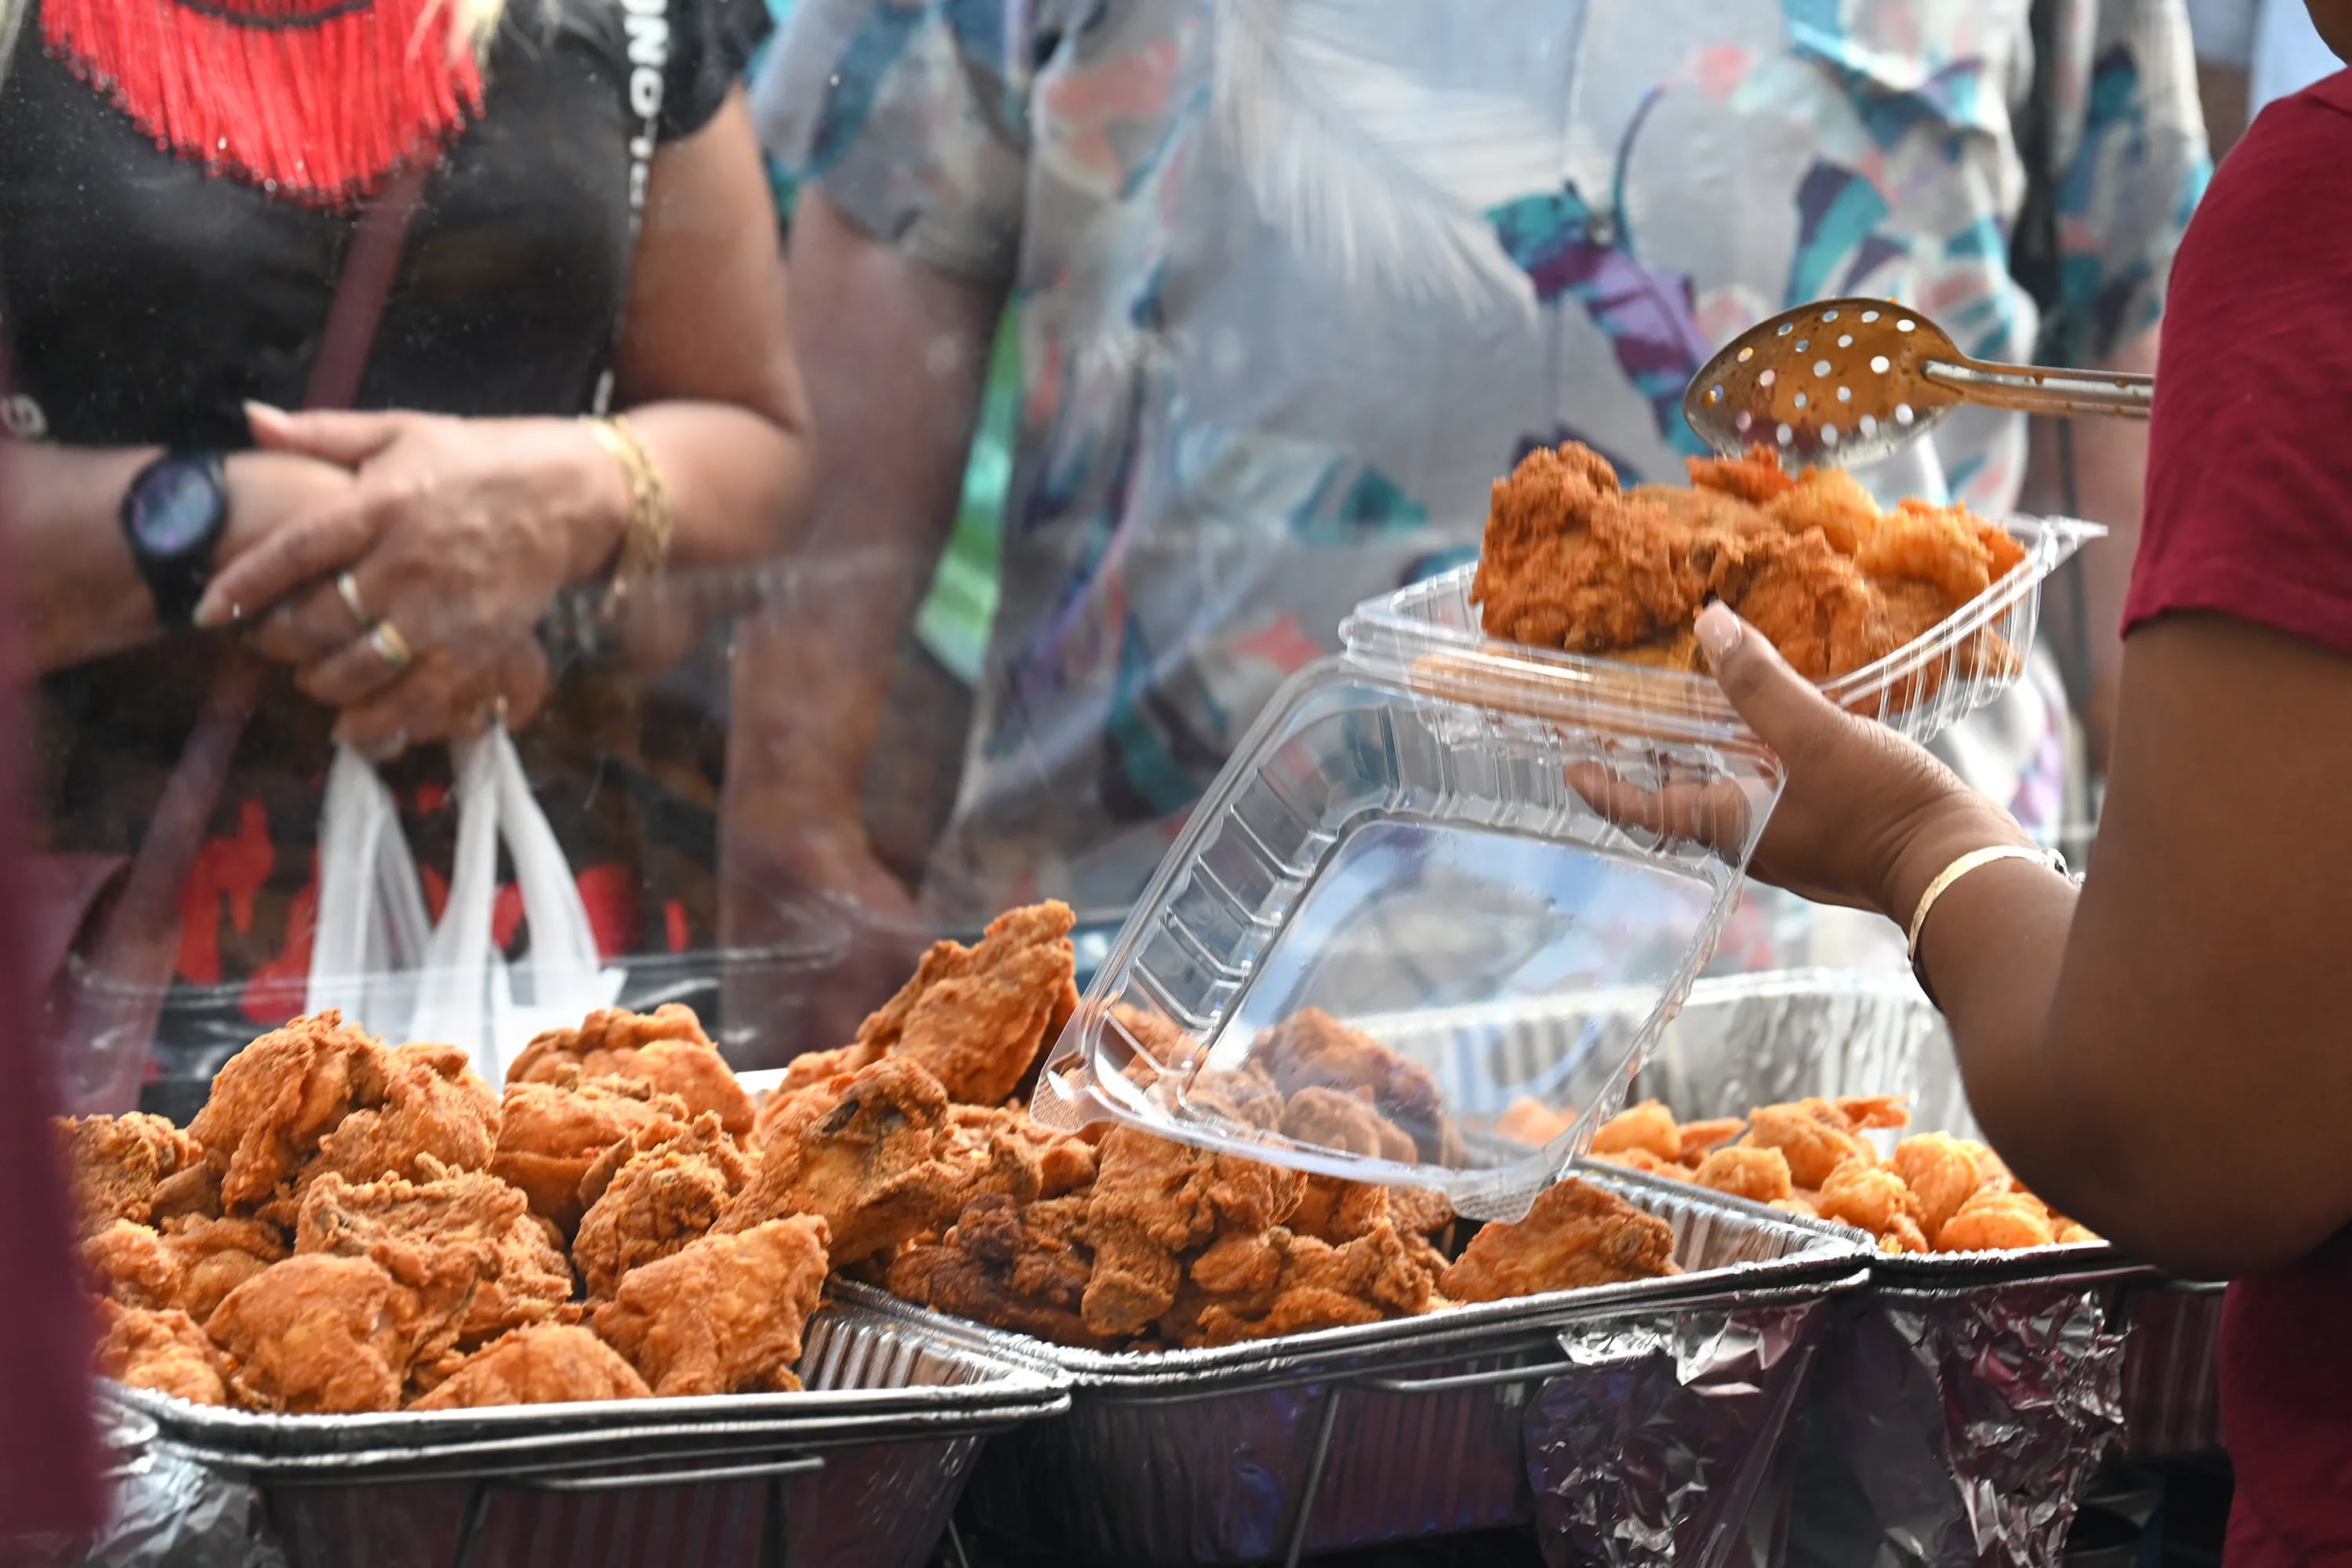 Soul Food is served up on South Street during the annual Odunde Festival June 12, 2022, bringing a taste of Africa to one of Philadelphia's oldest, historically African American neighborhood.